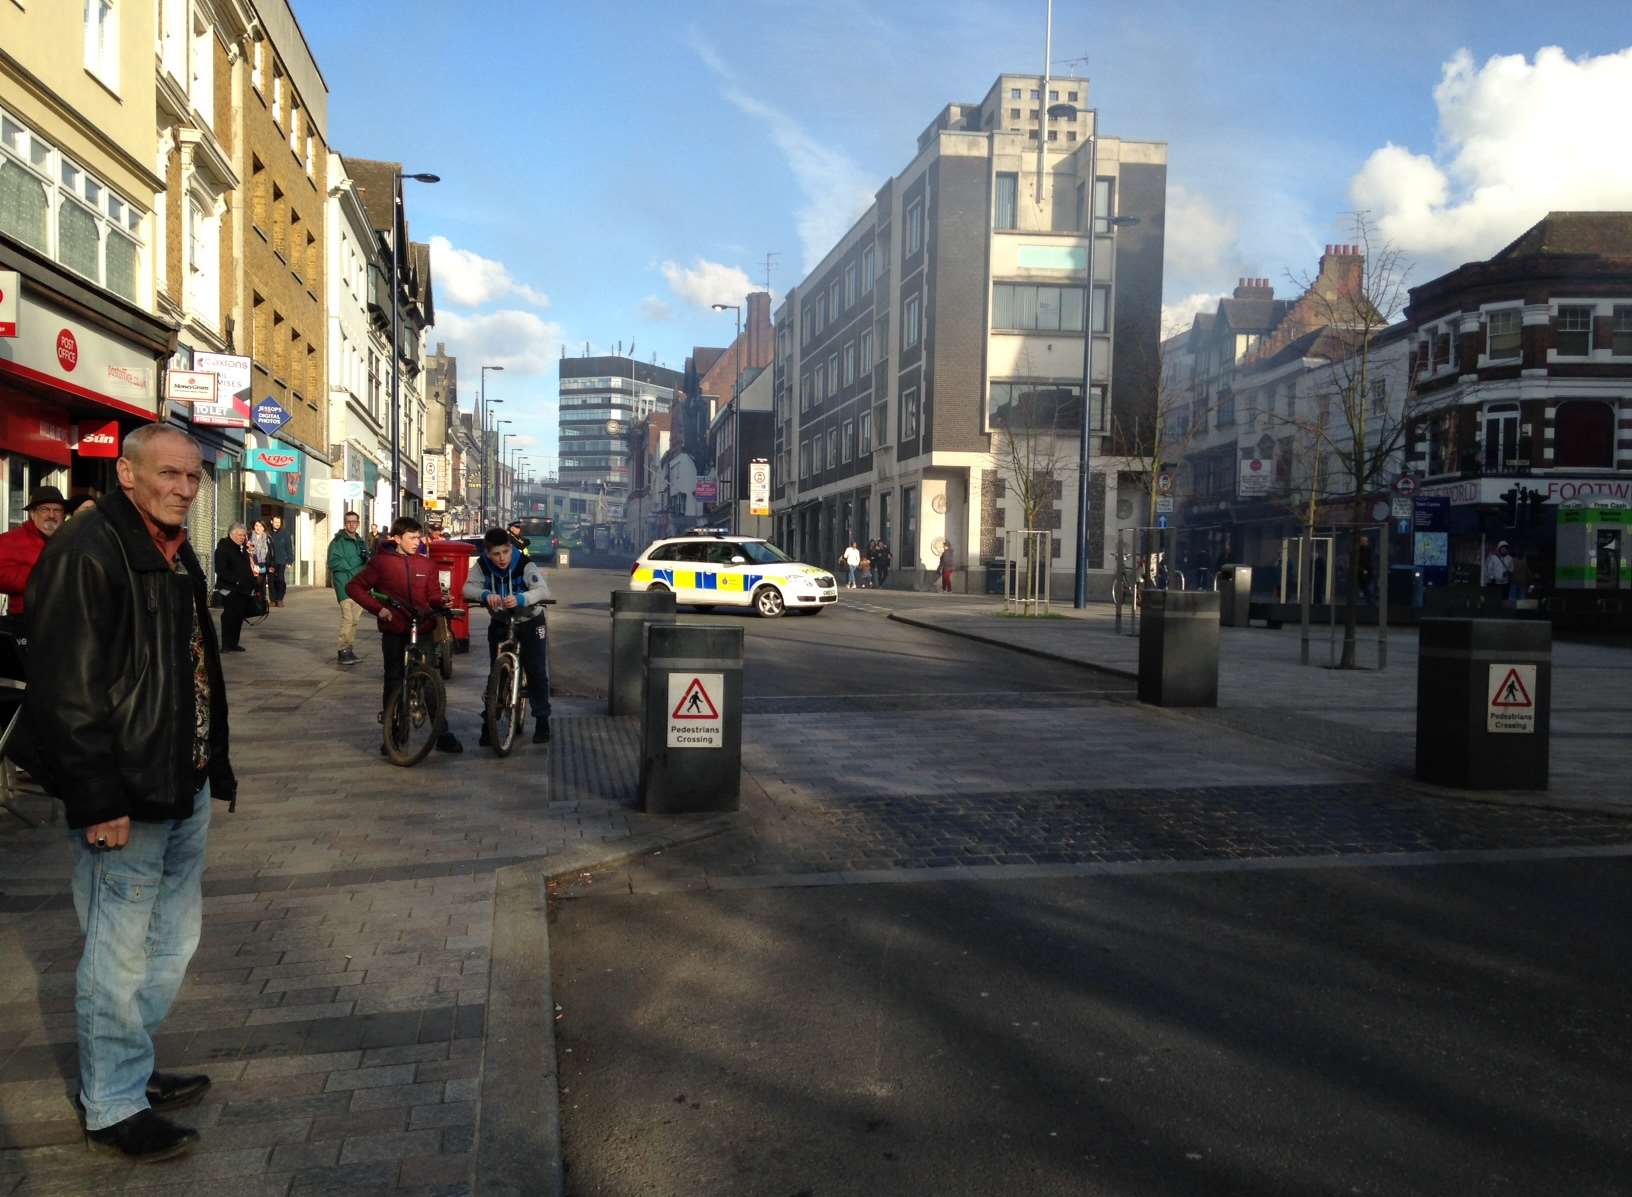 High Street, Maidstone, is closed in both directions